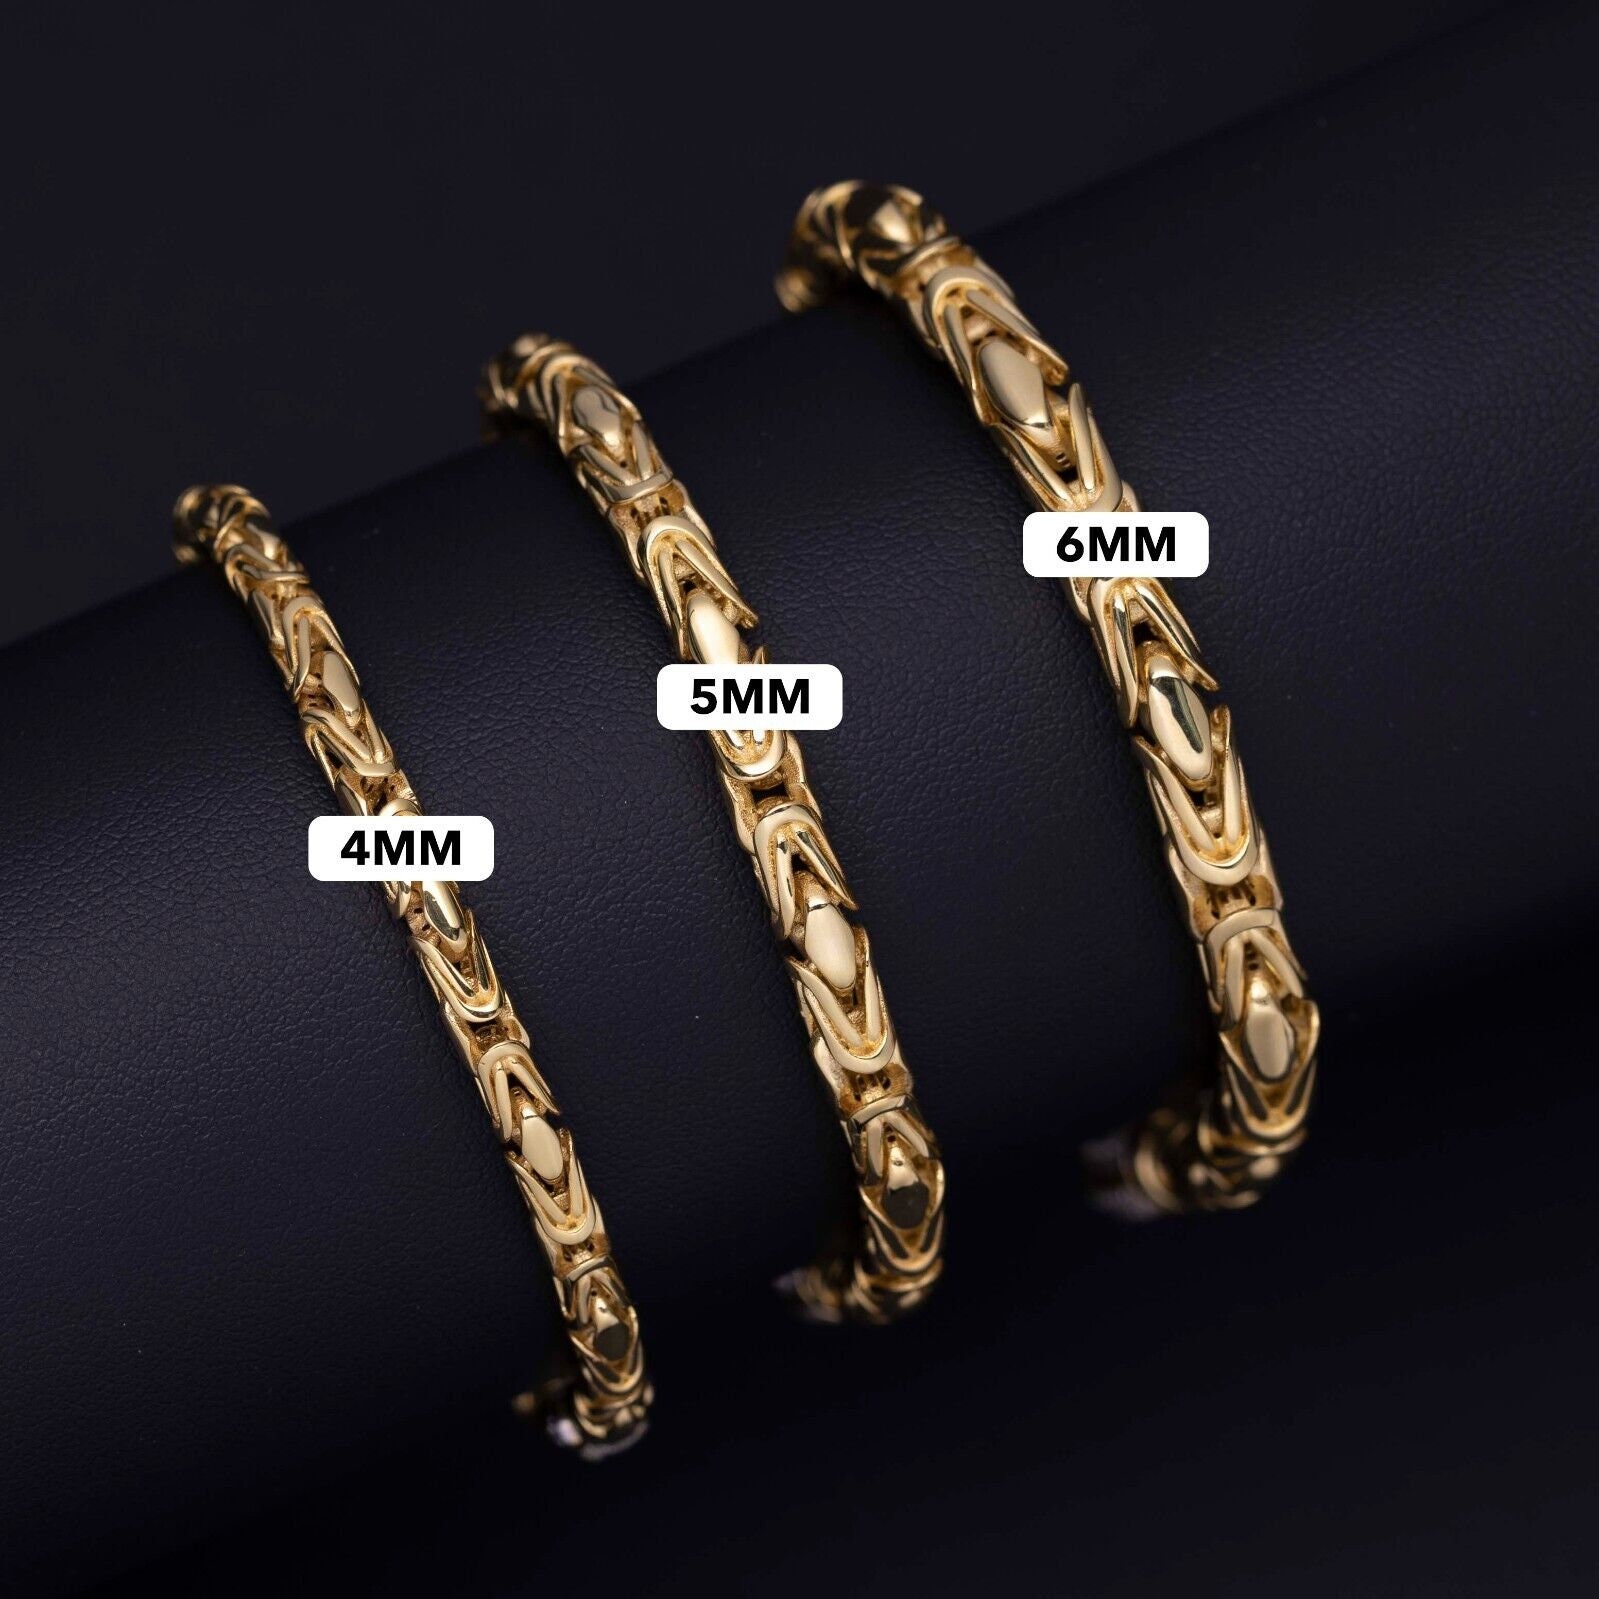 Gold Rate Update | Gold rate, Gold, Gold bangles